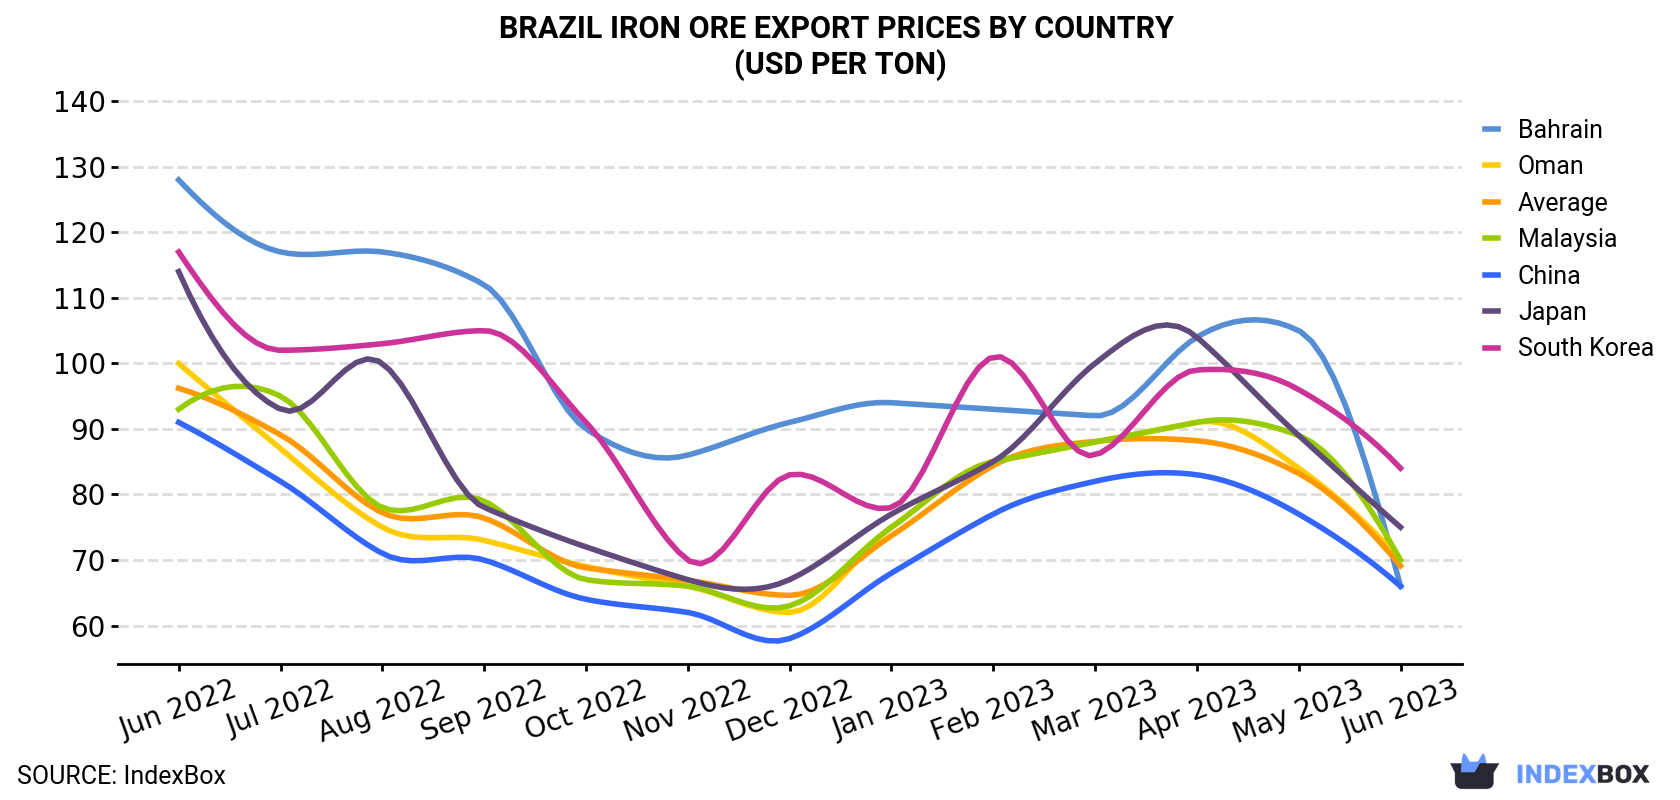 Brazil Iron Ore Export Prices By Country (USD Per Ton)